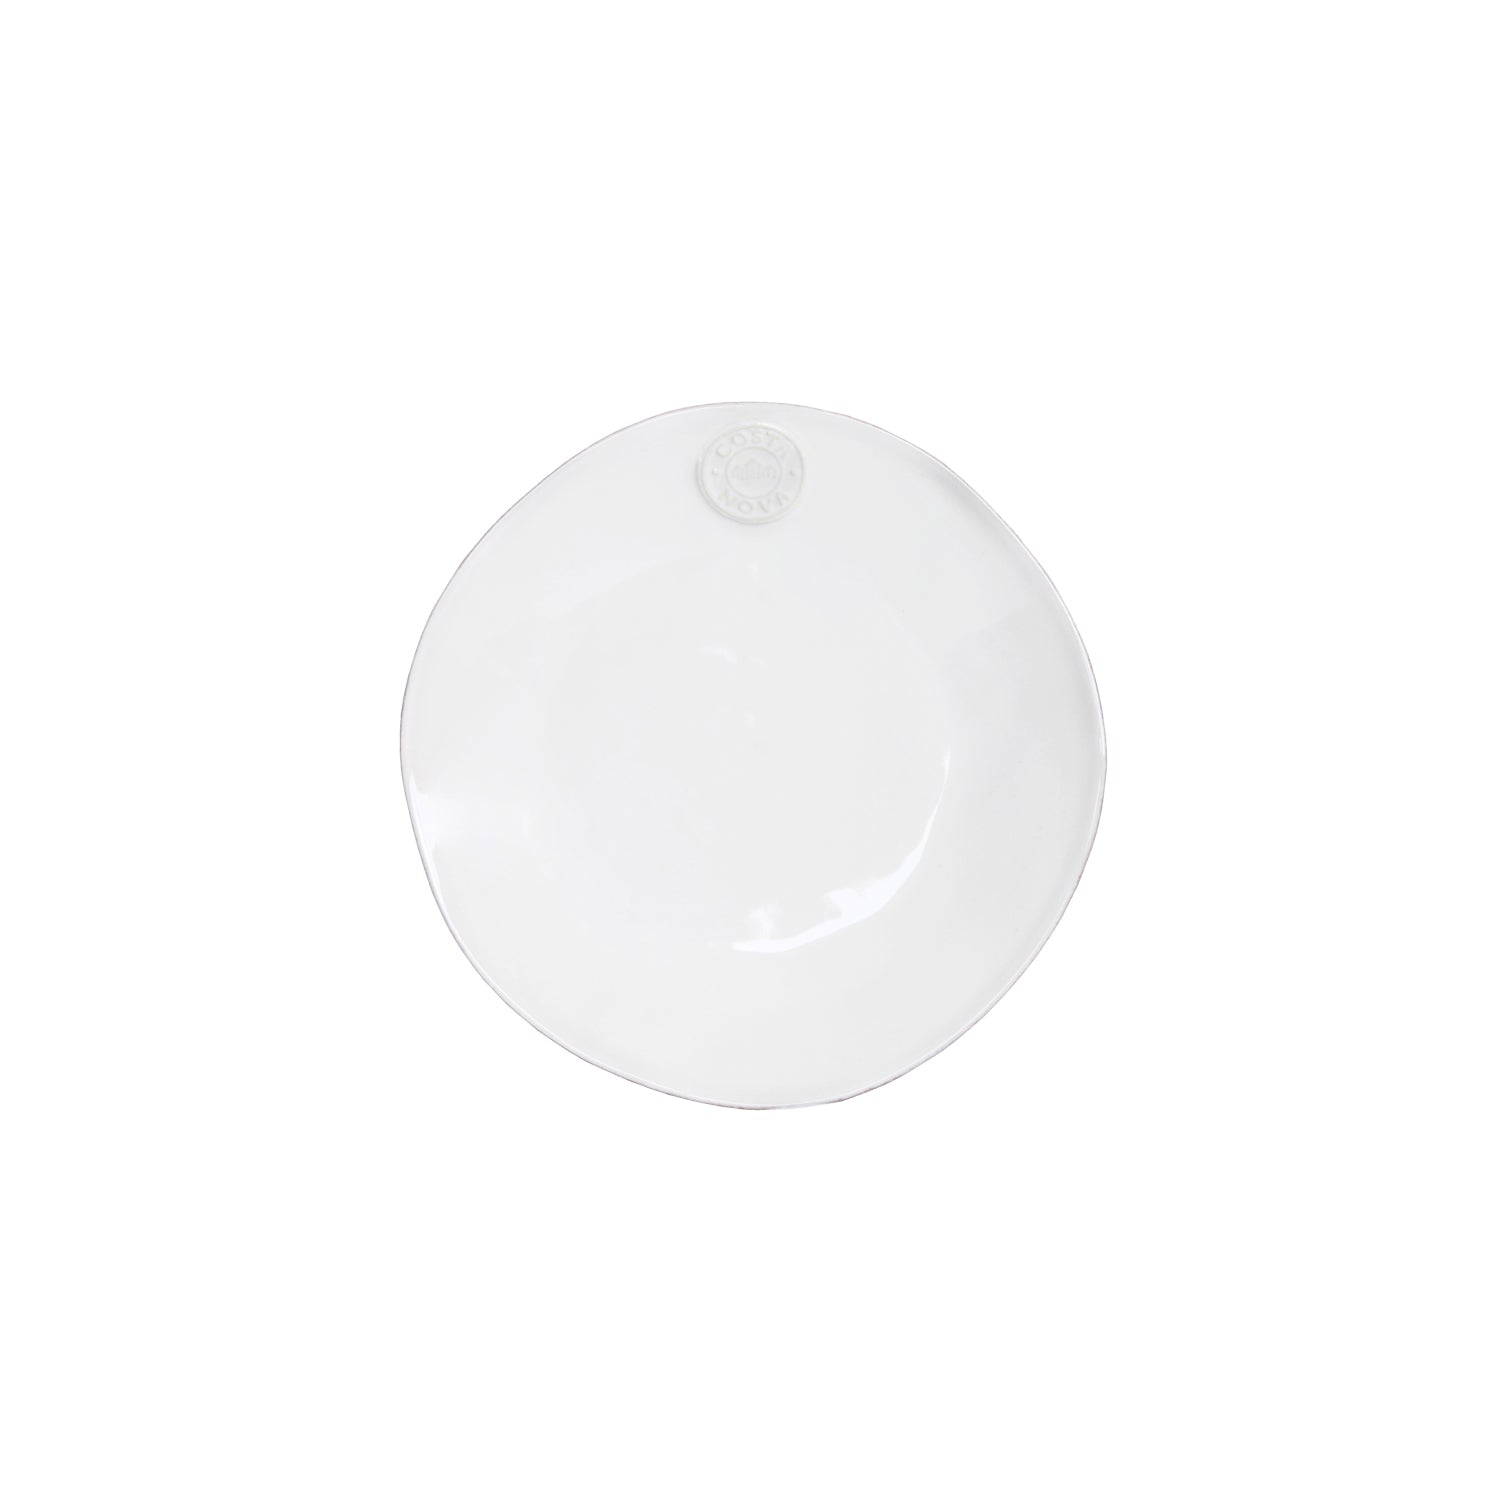 White 9 Inch Salad Plate